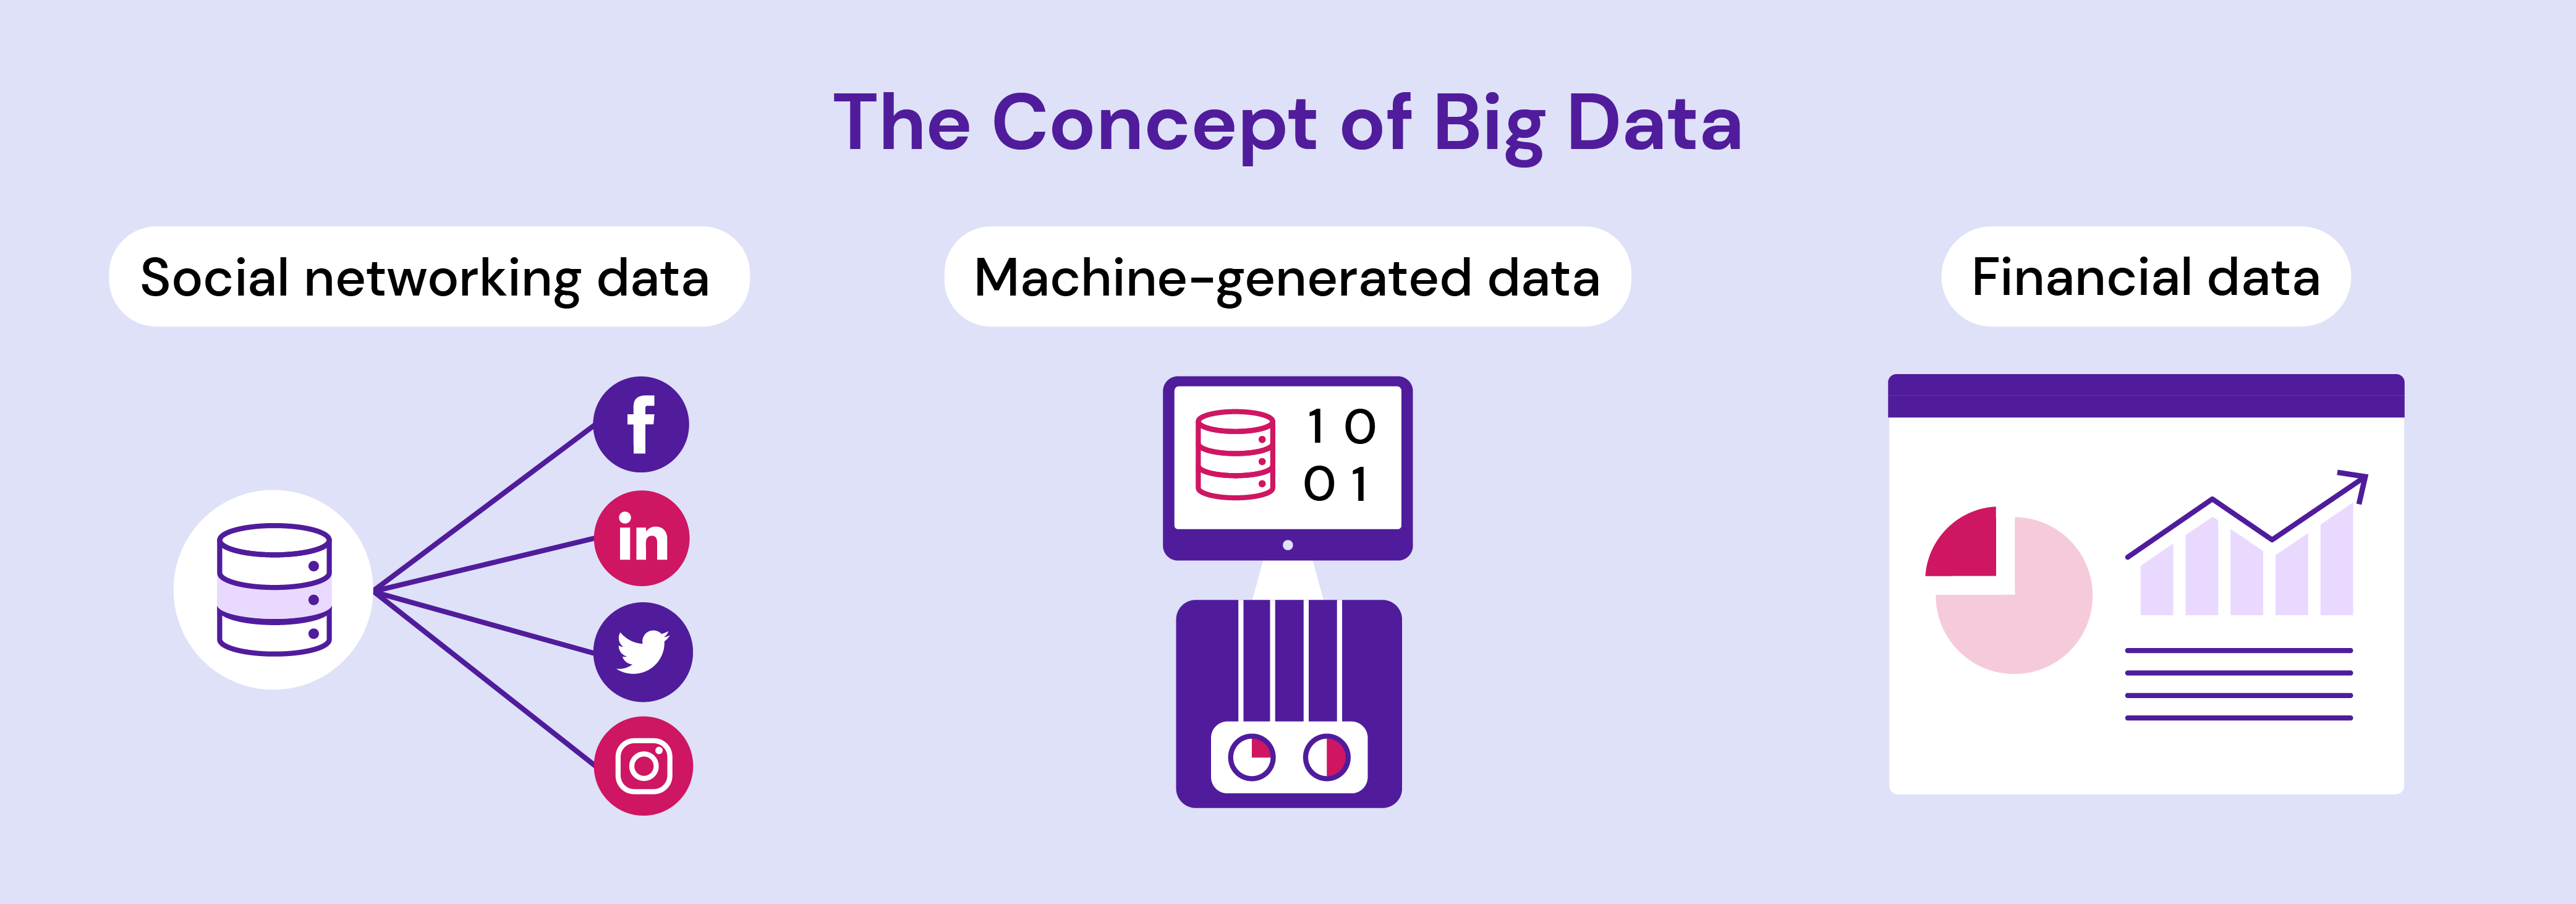 The Concept of Big Data